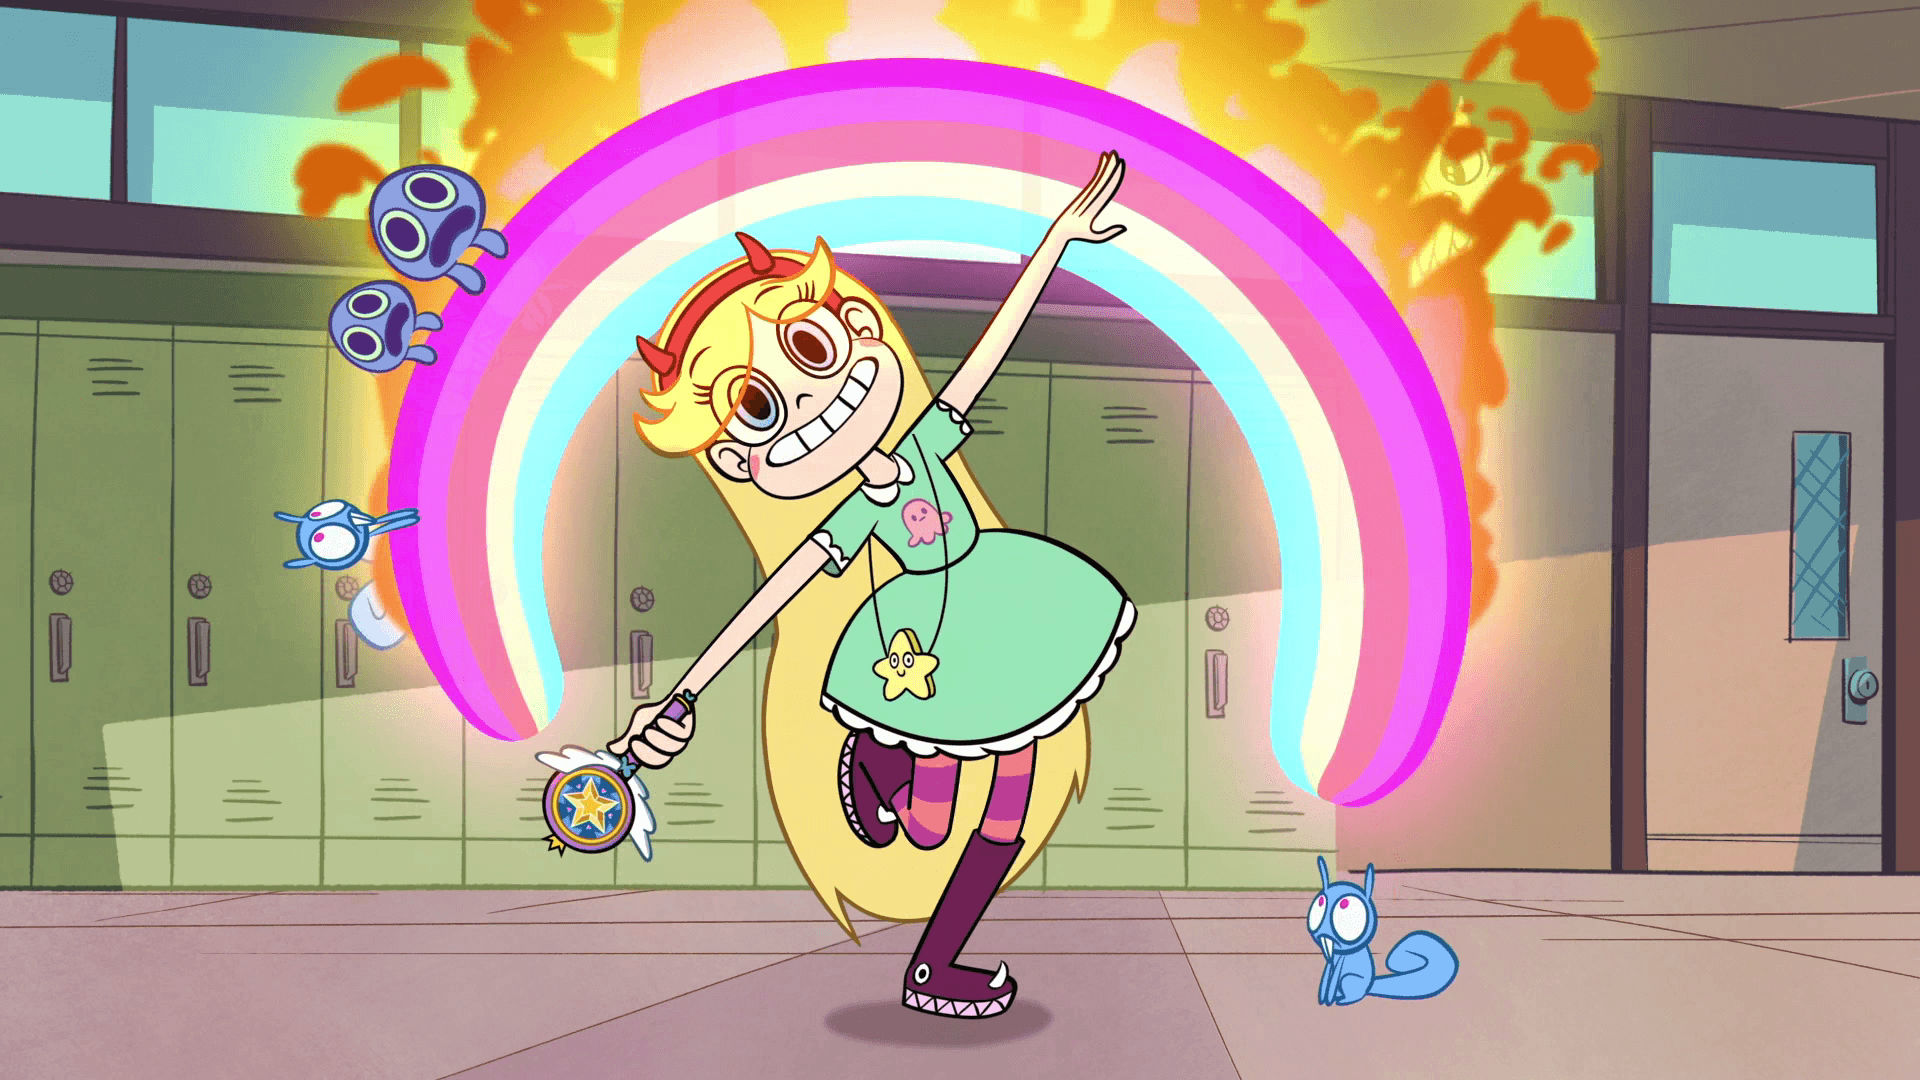 Star Vs. The Forces Google Meet Background